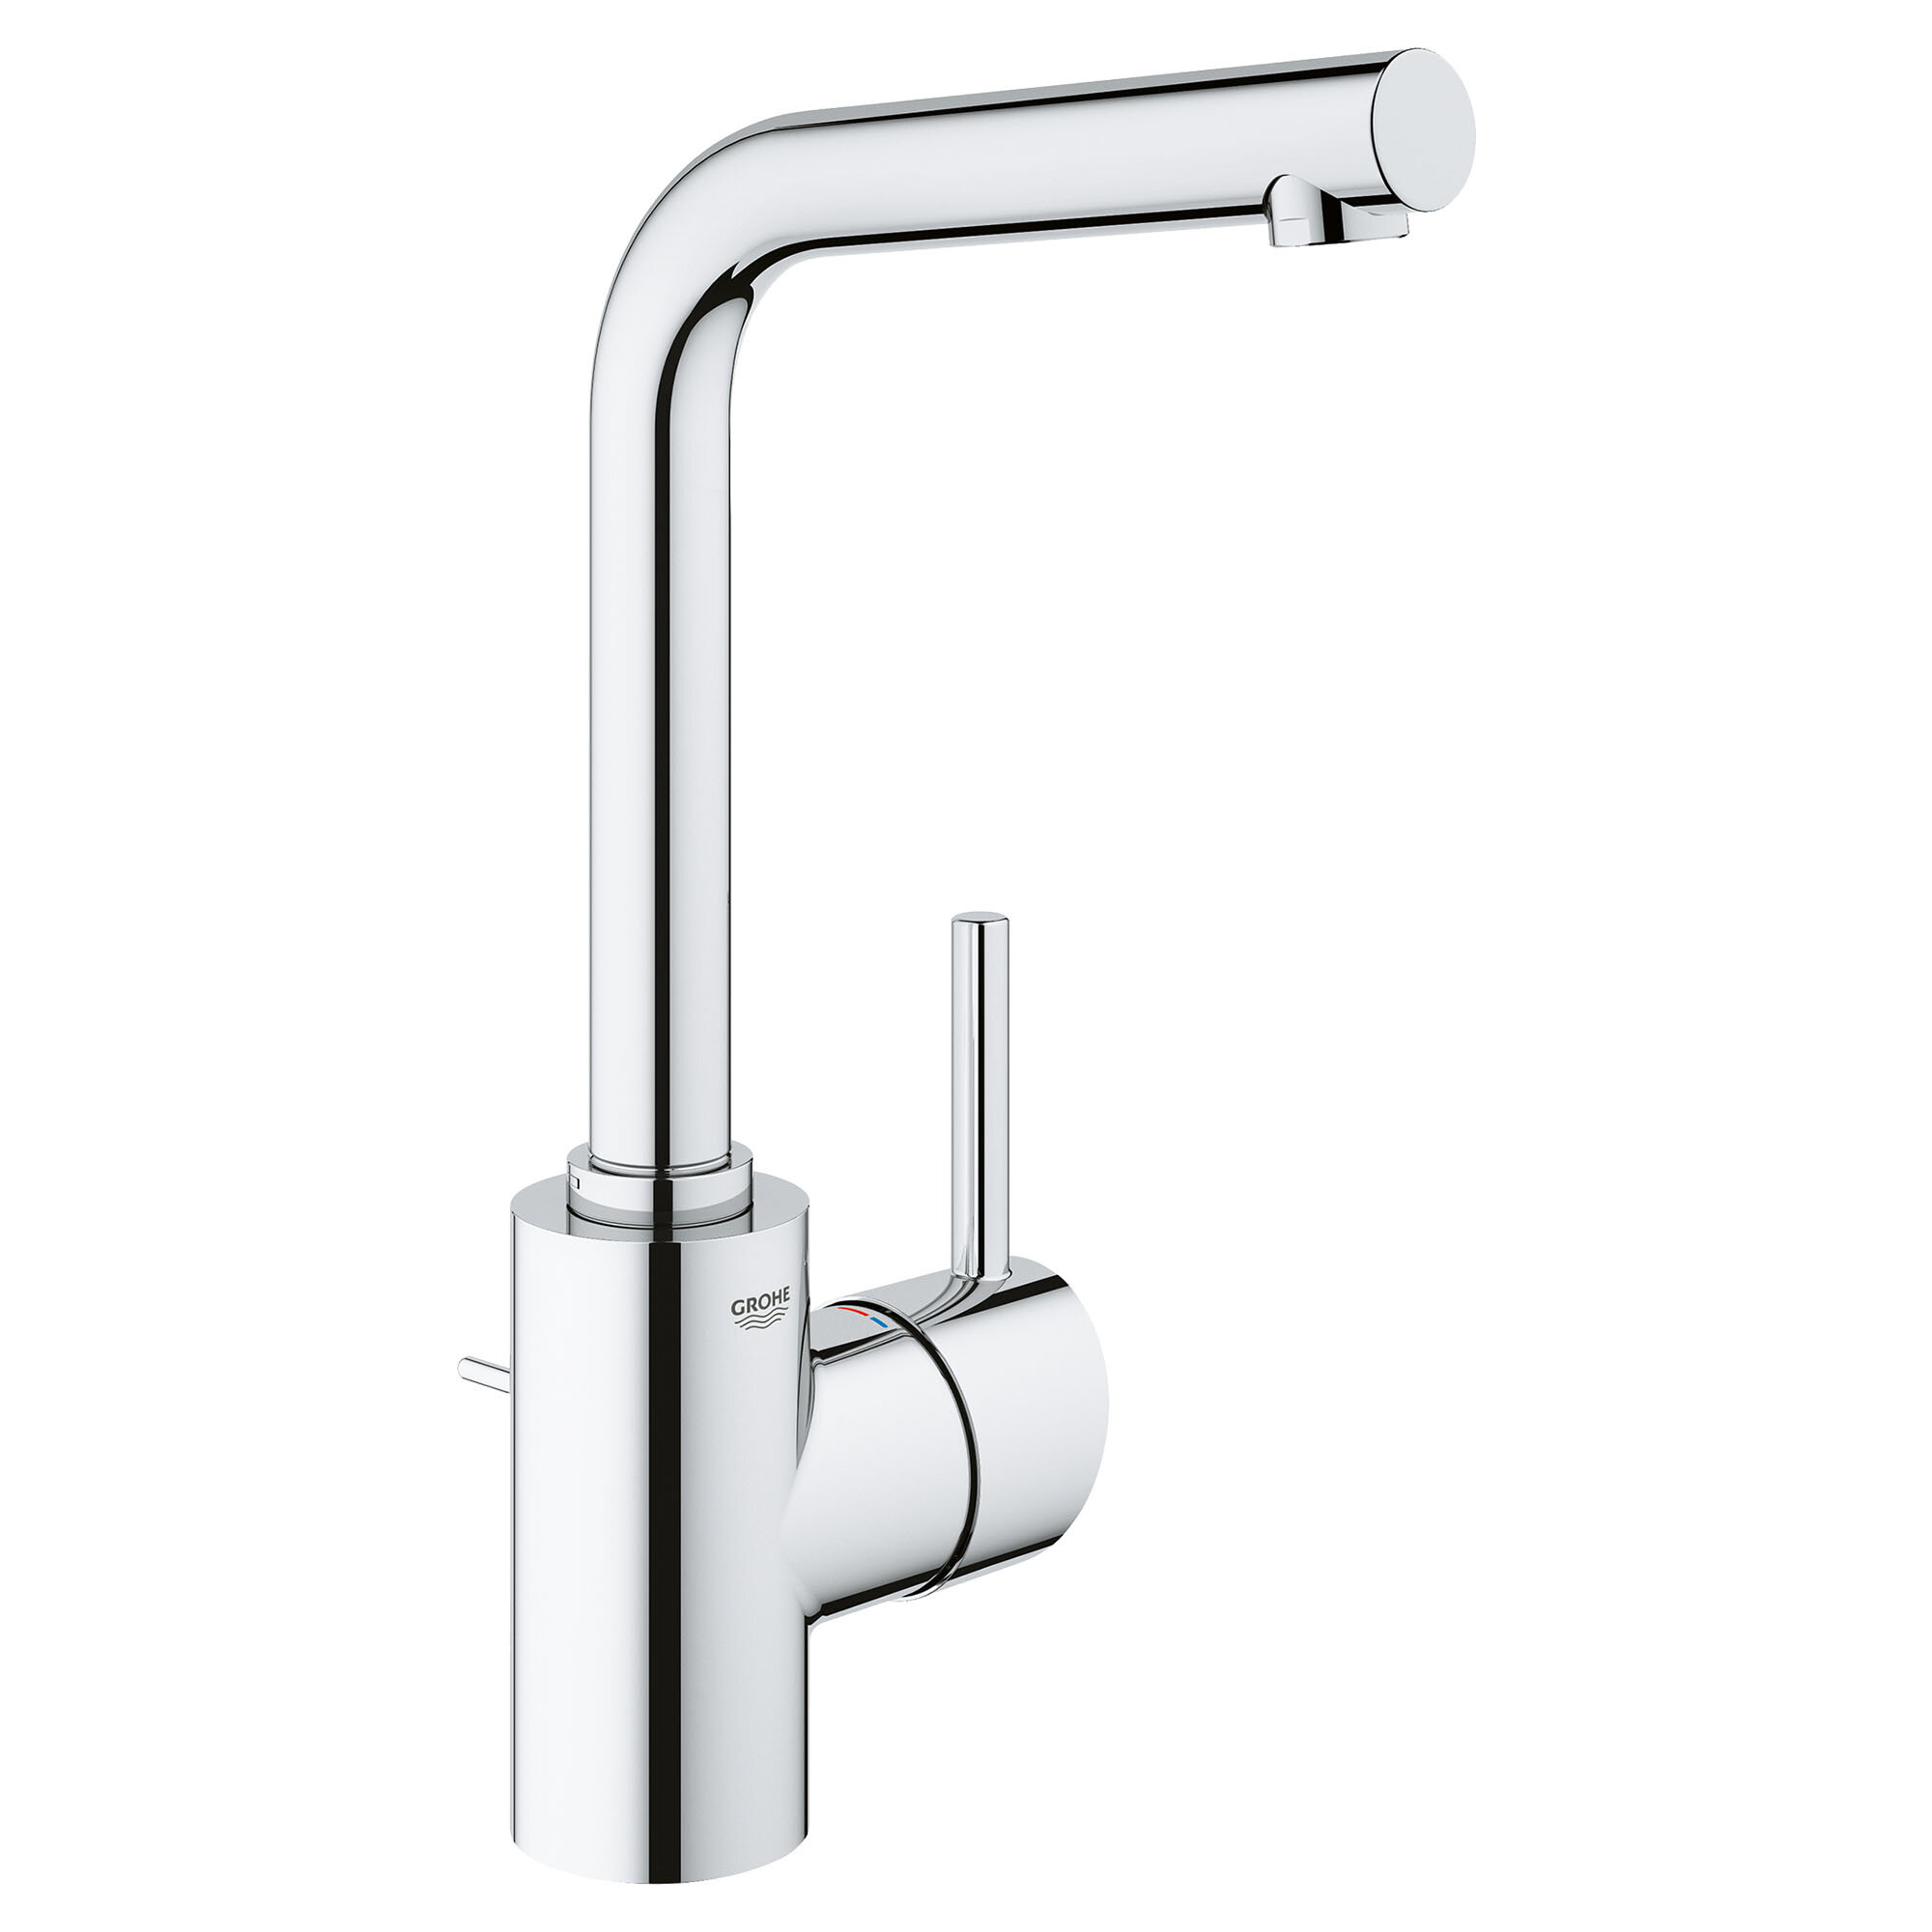 Grohe Concetto Single Hole Bathroom Faucet With Drain Assembly Reviews Wayfair